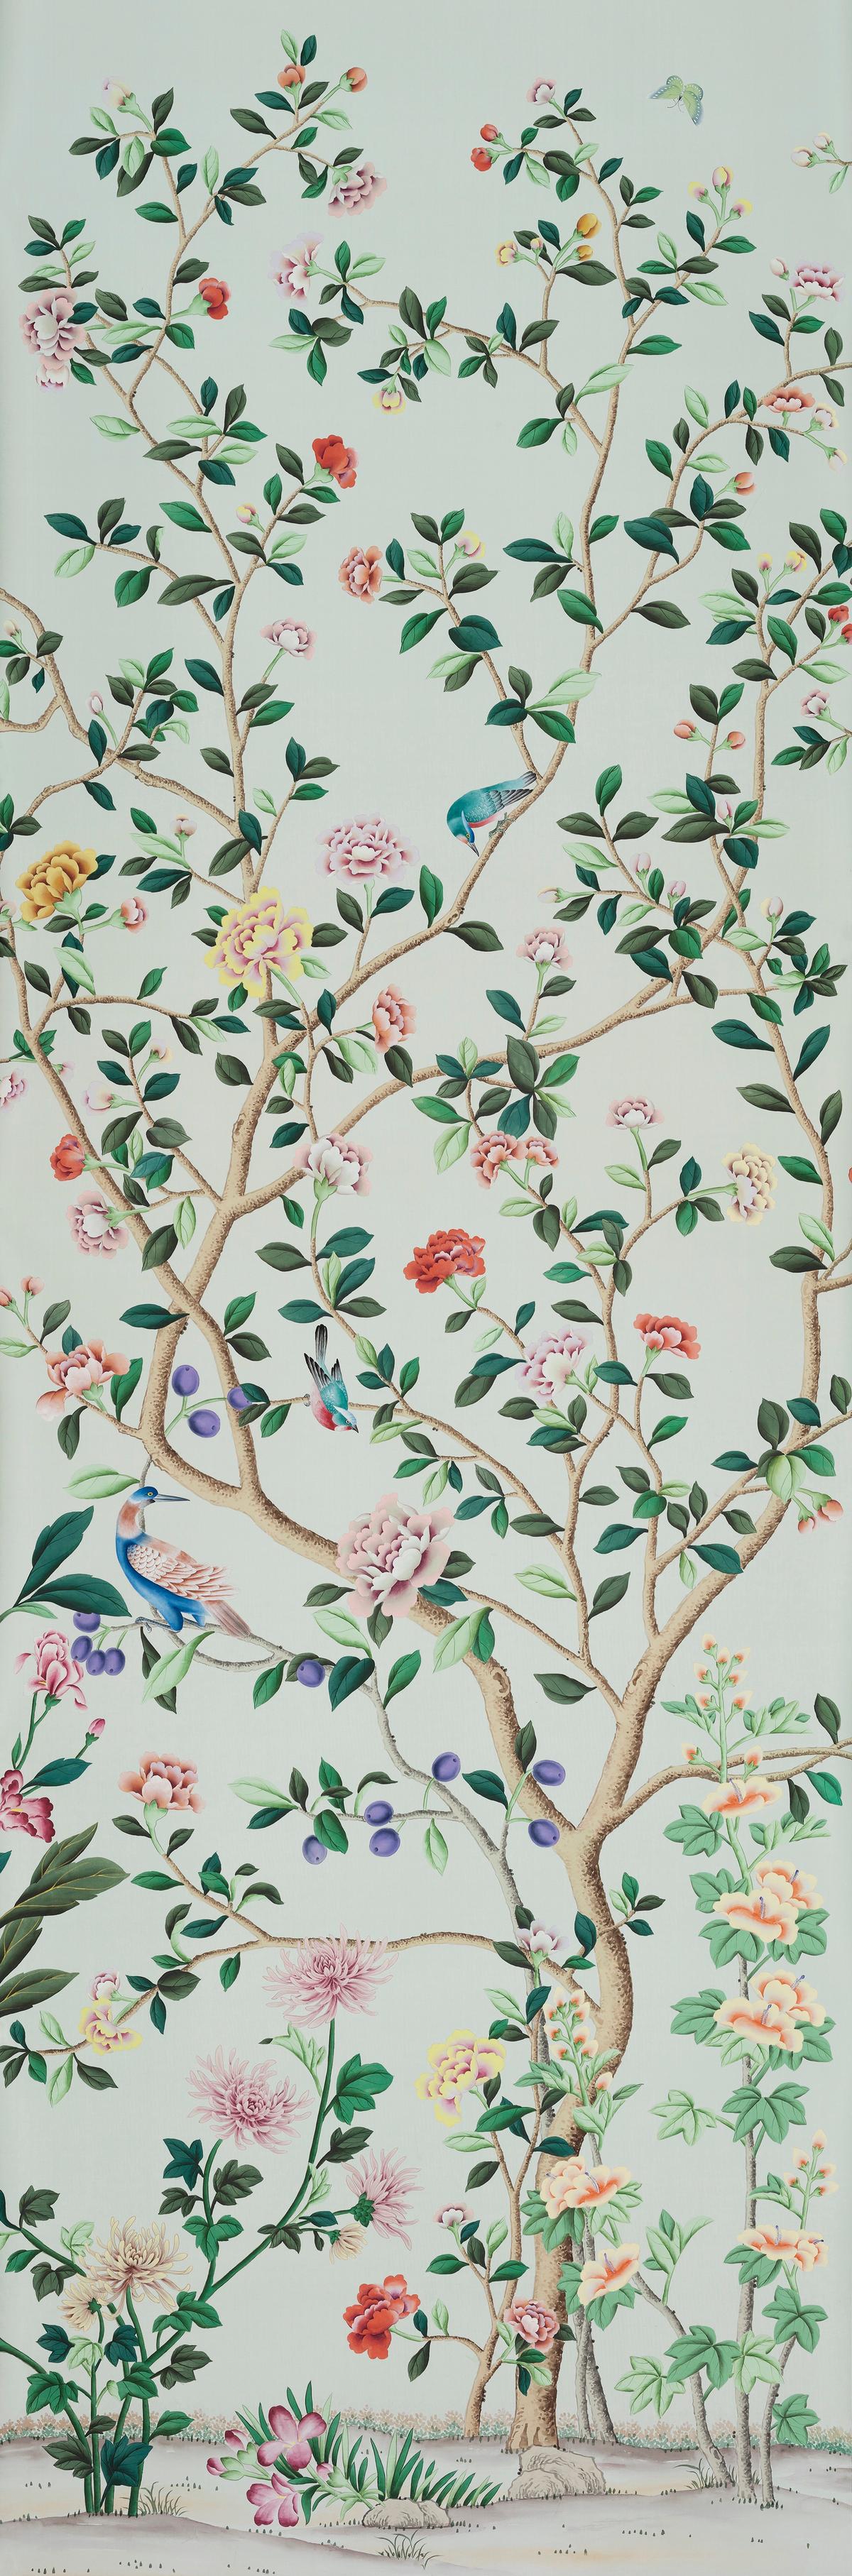 If Walls Could Dream: How de Gournay's Whimsical Wallpapers Are Keeping a Nearly Lost Art Alive—One Brushstroke at a Time